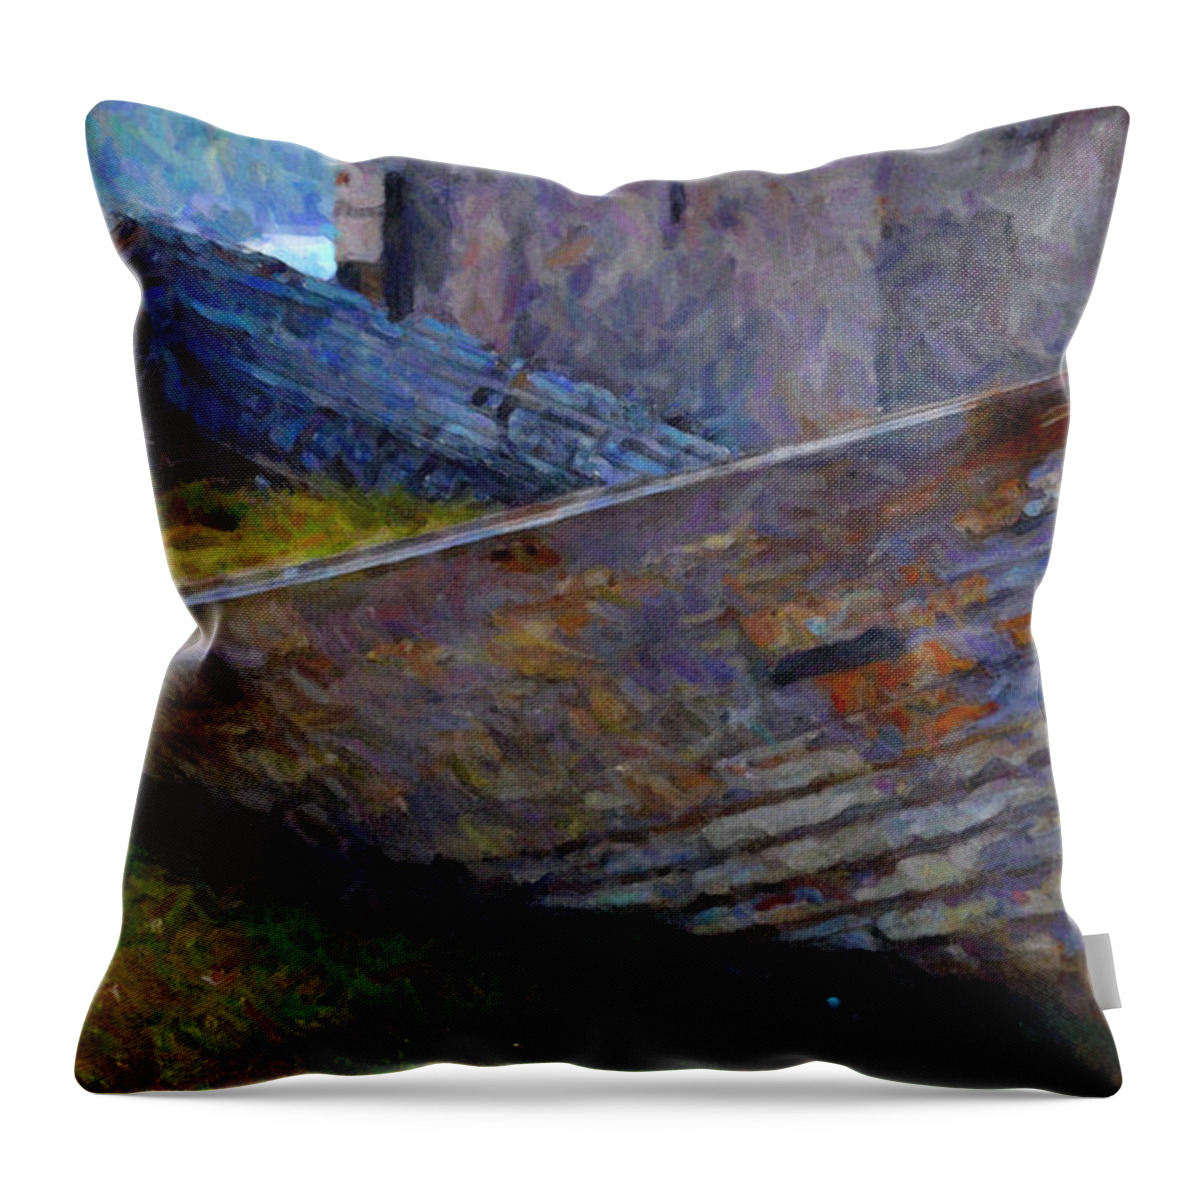 Poster Throw Pillow featuring the digital art Abandoned Boat by Chuck Mountain